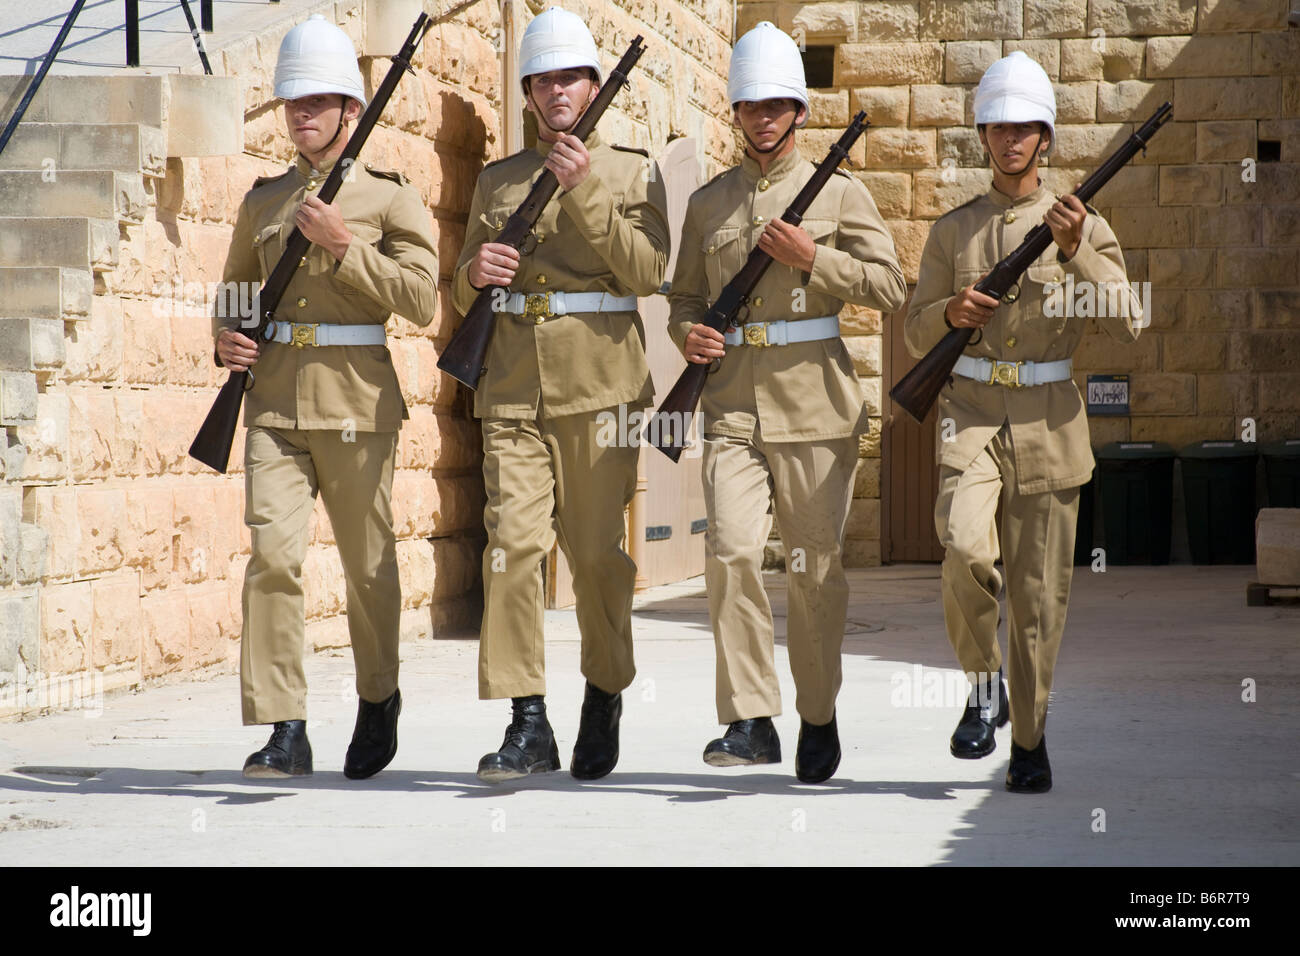 Four soldiers running and holding rifles, Fort Rinella, Kalkara, Malta Stock Photo